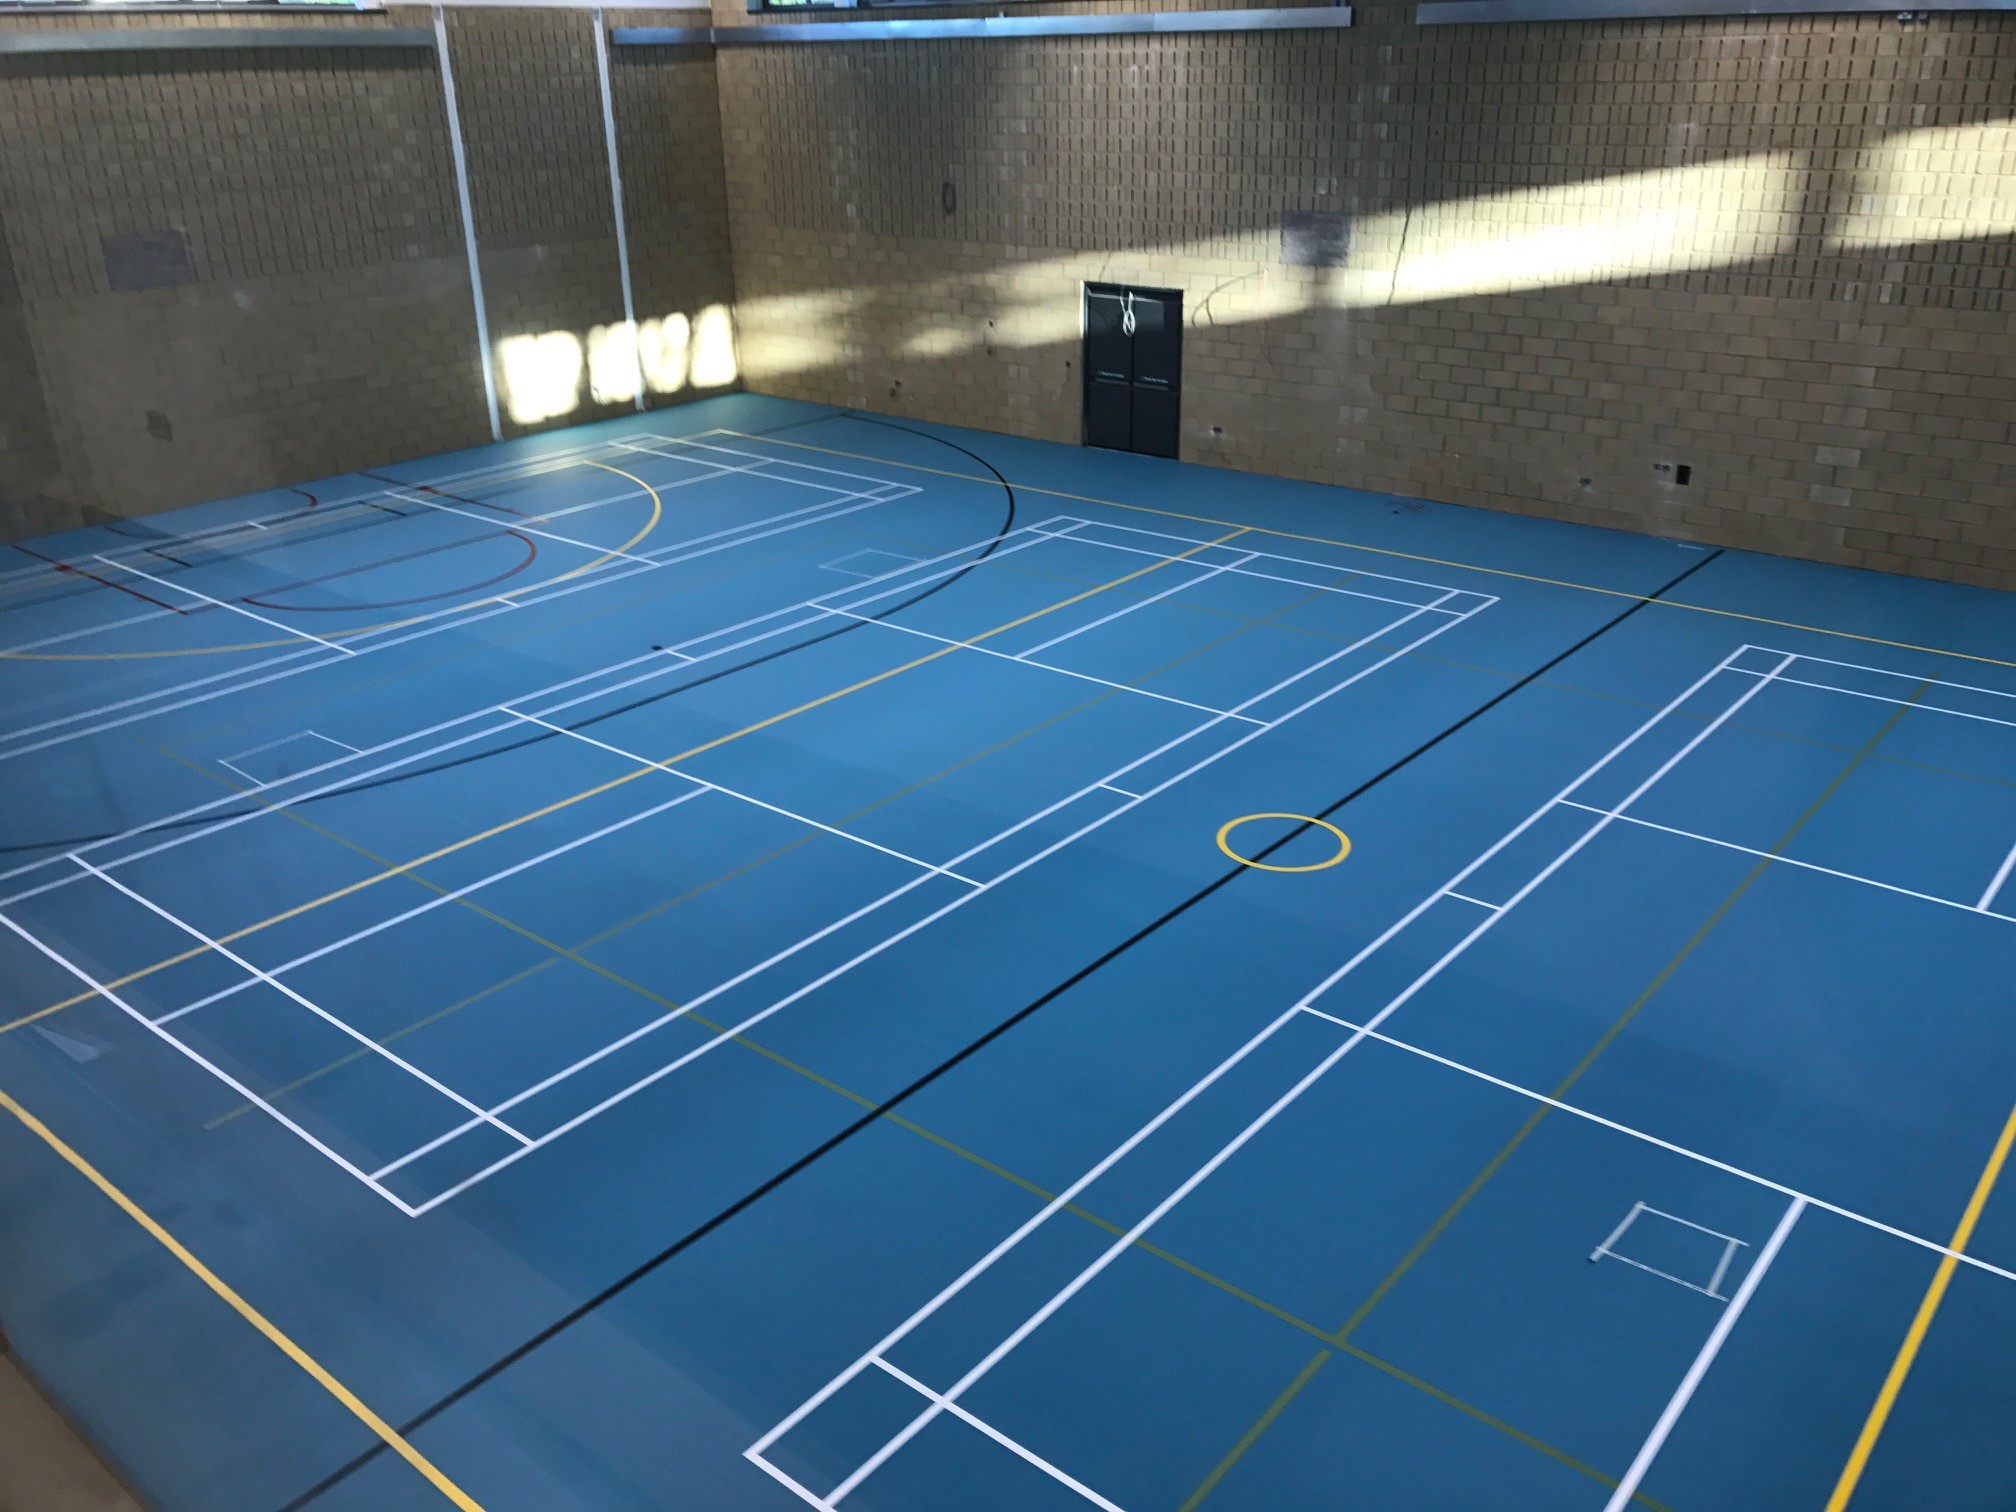 School sports hall blue Pulastic floor installation and court markings by Sports Surfaces UK